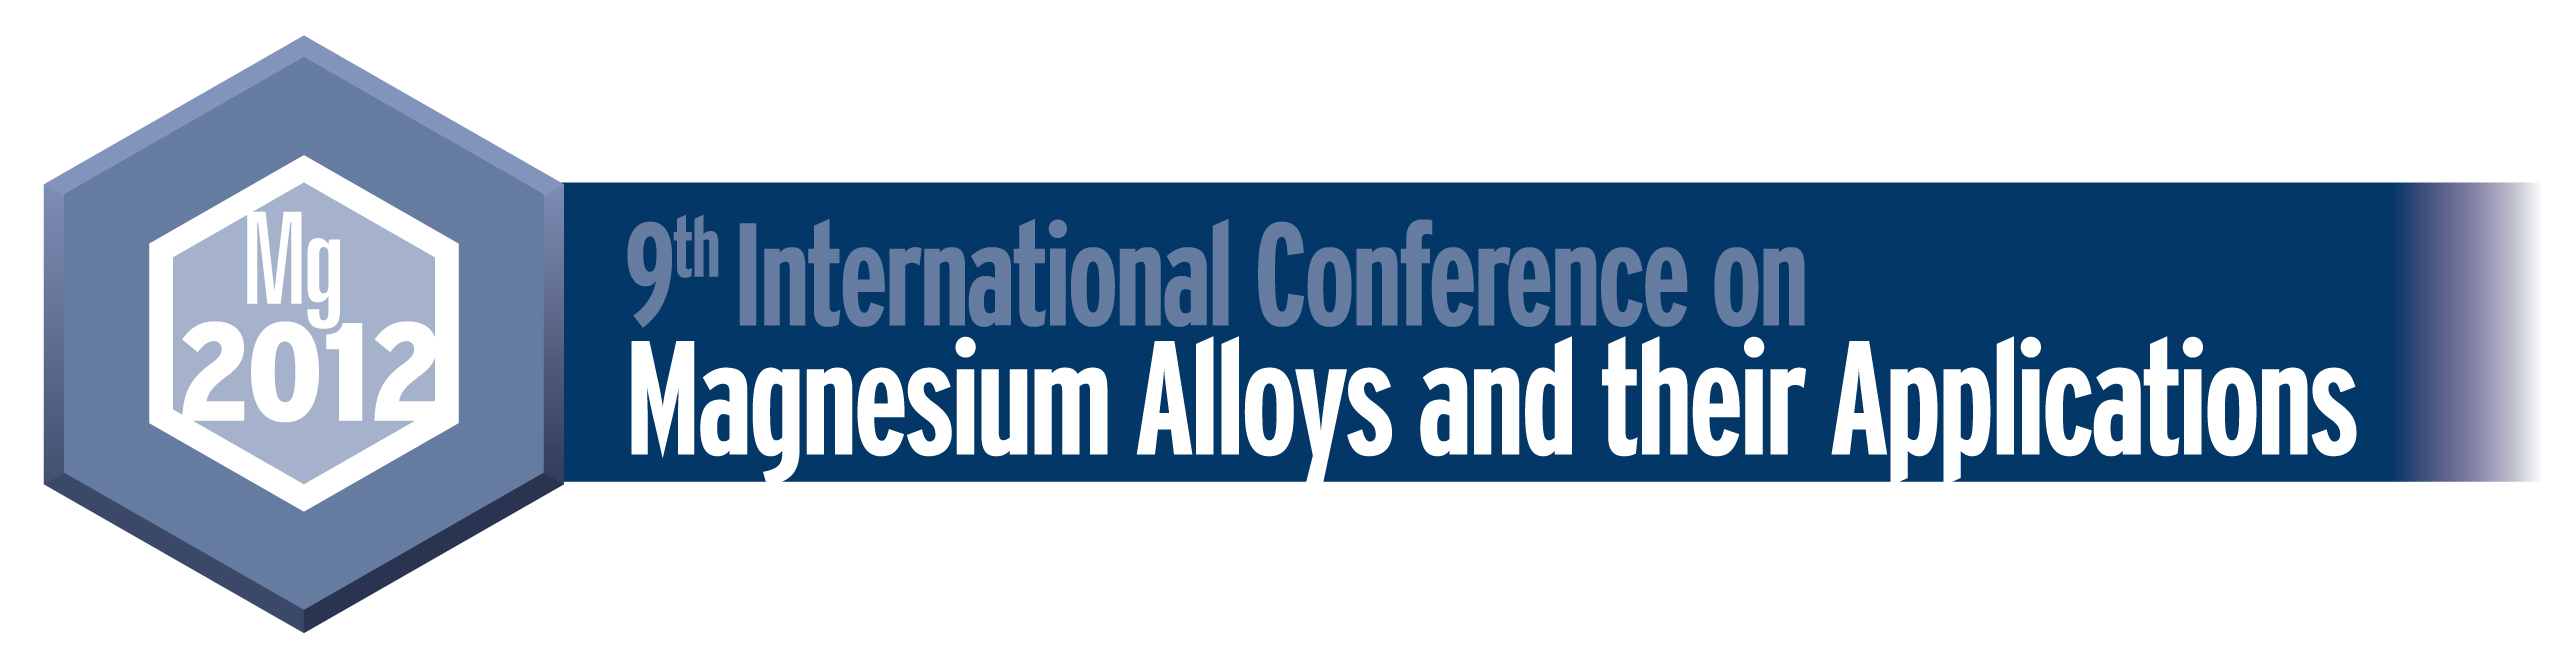 9th International Conference on Magnesium Alloys and Their Applications